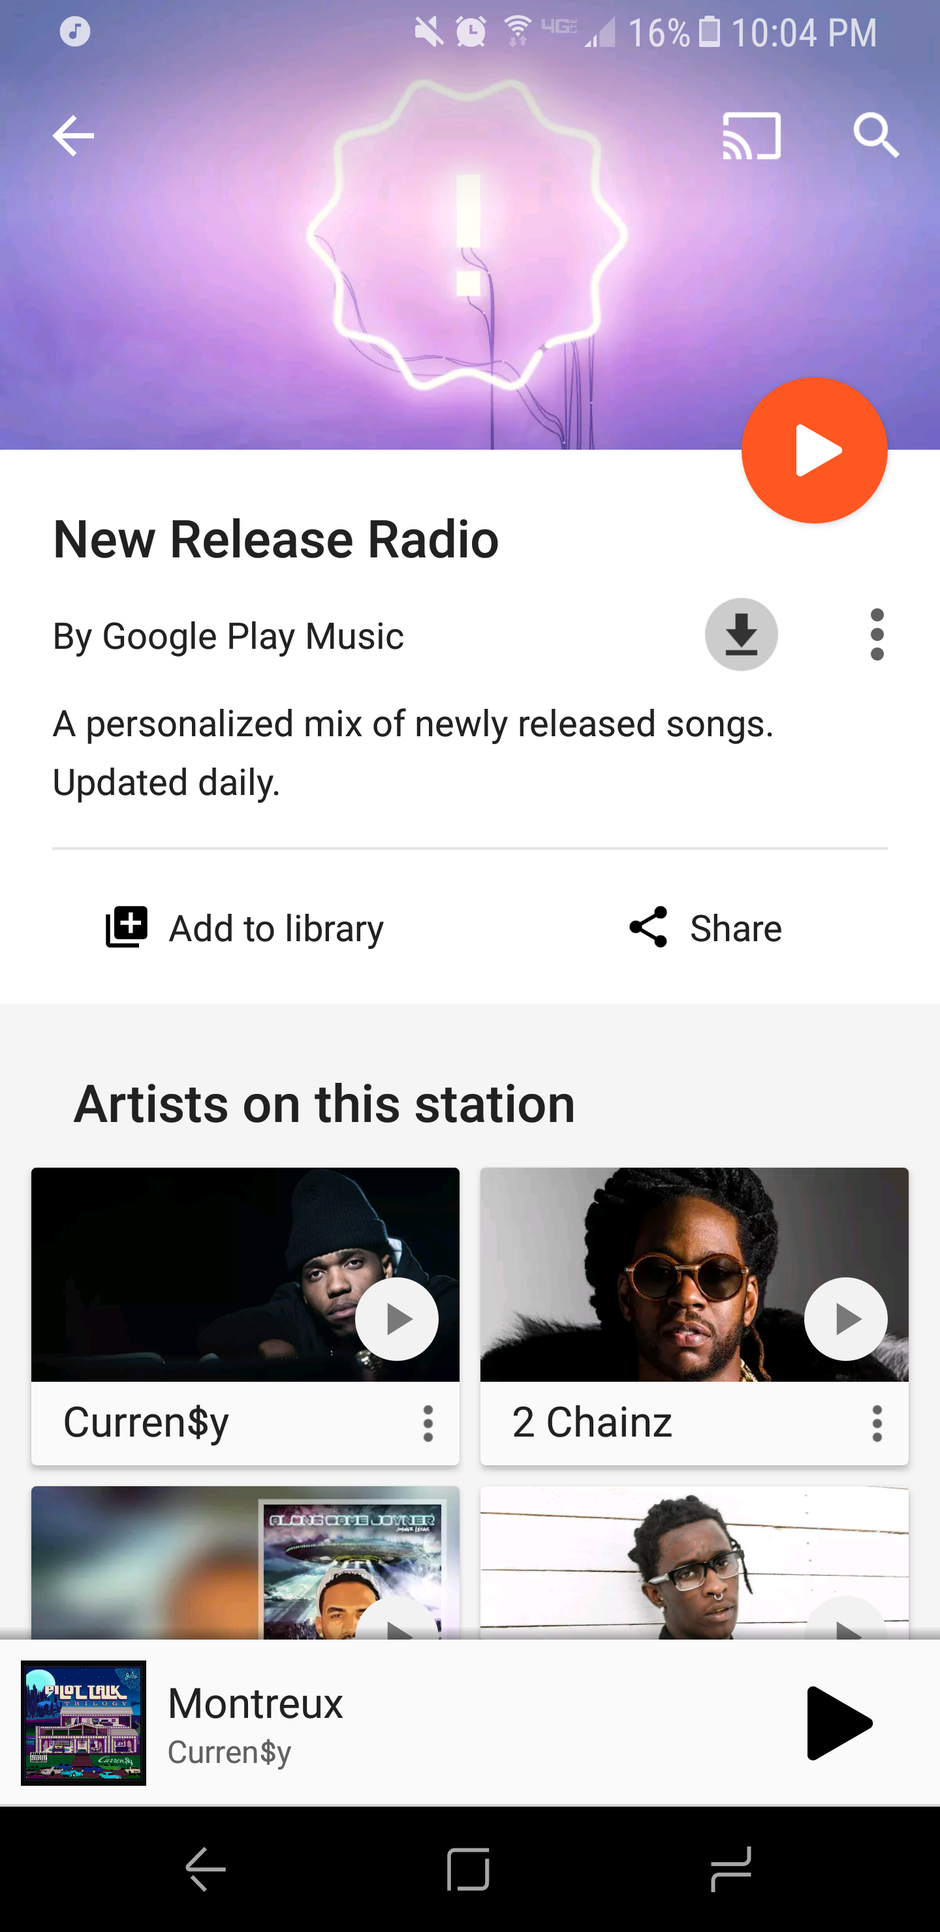 Galaxy S8/S8+ owners get an exclusive ‘New Release Radio’ station in Google Play Music